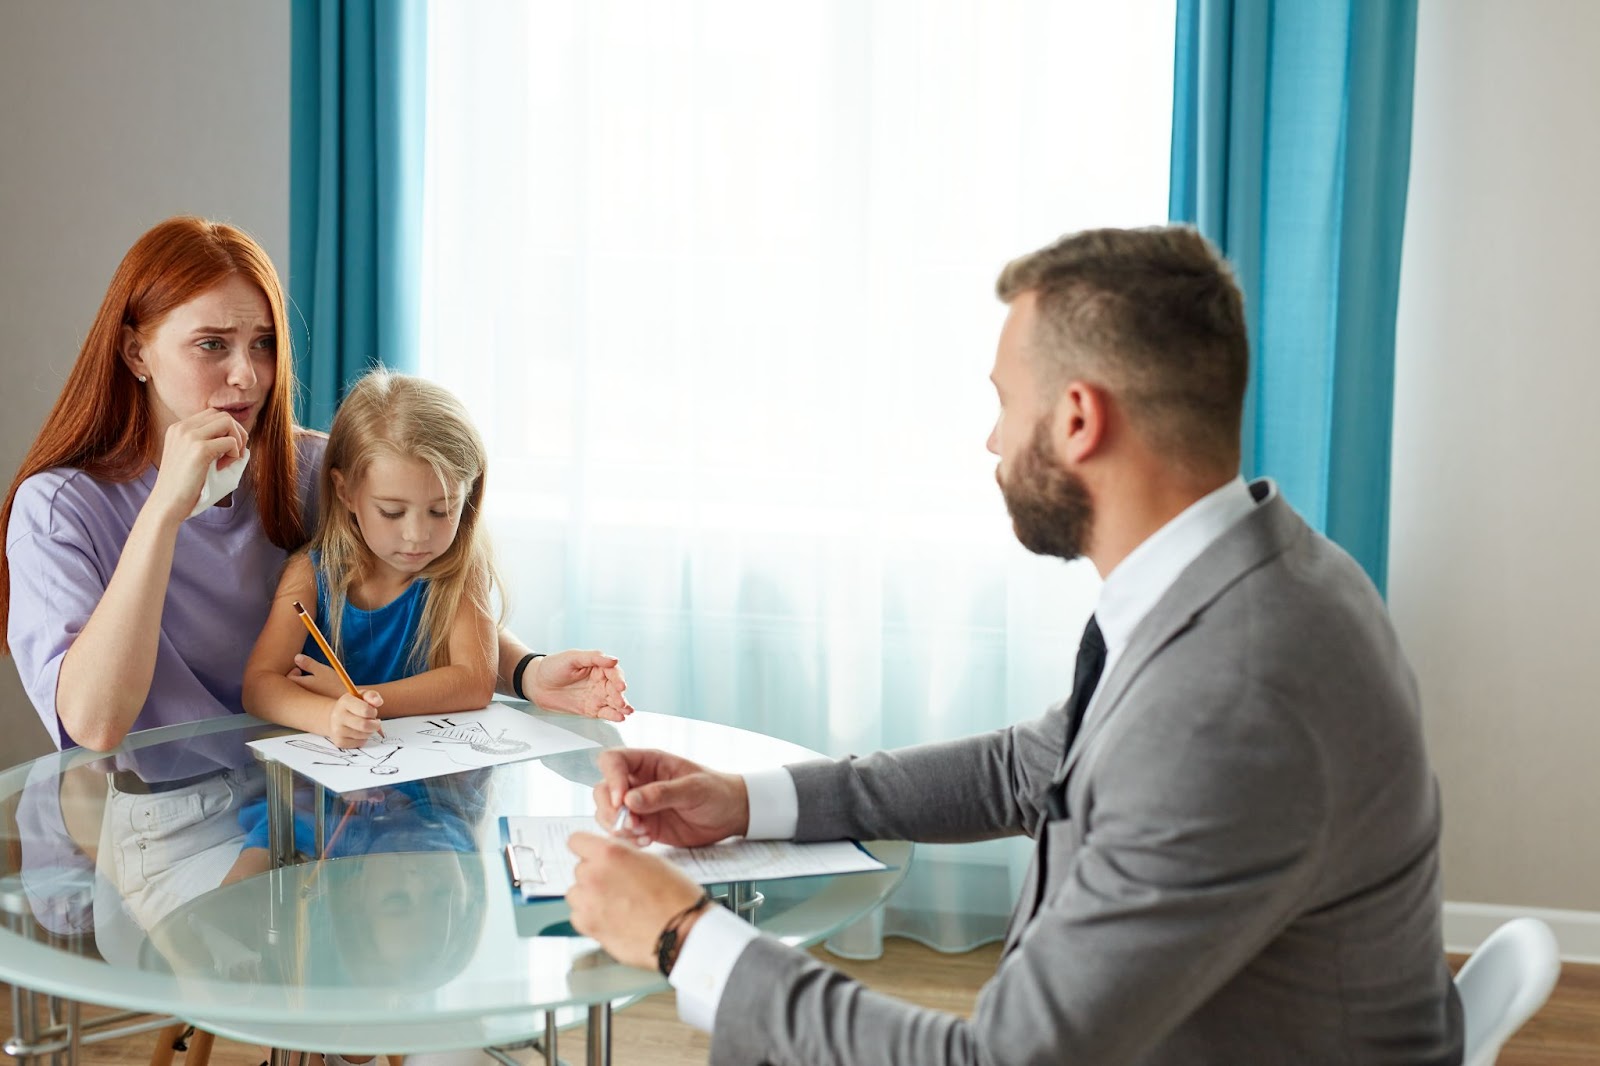 A man, woman, and child seated at a table, possibly discussing family matters with family attorneys or child support services.